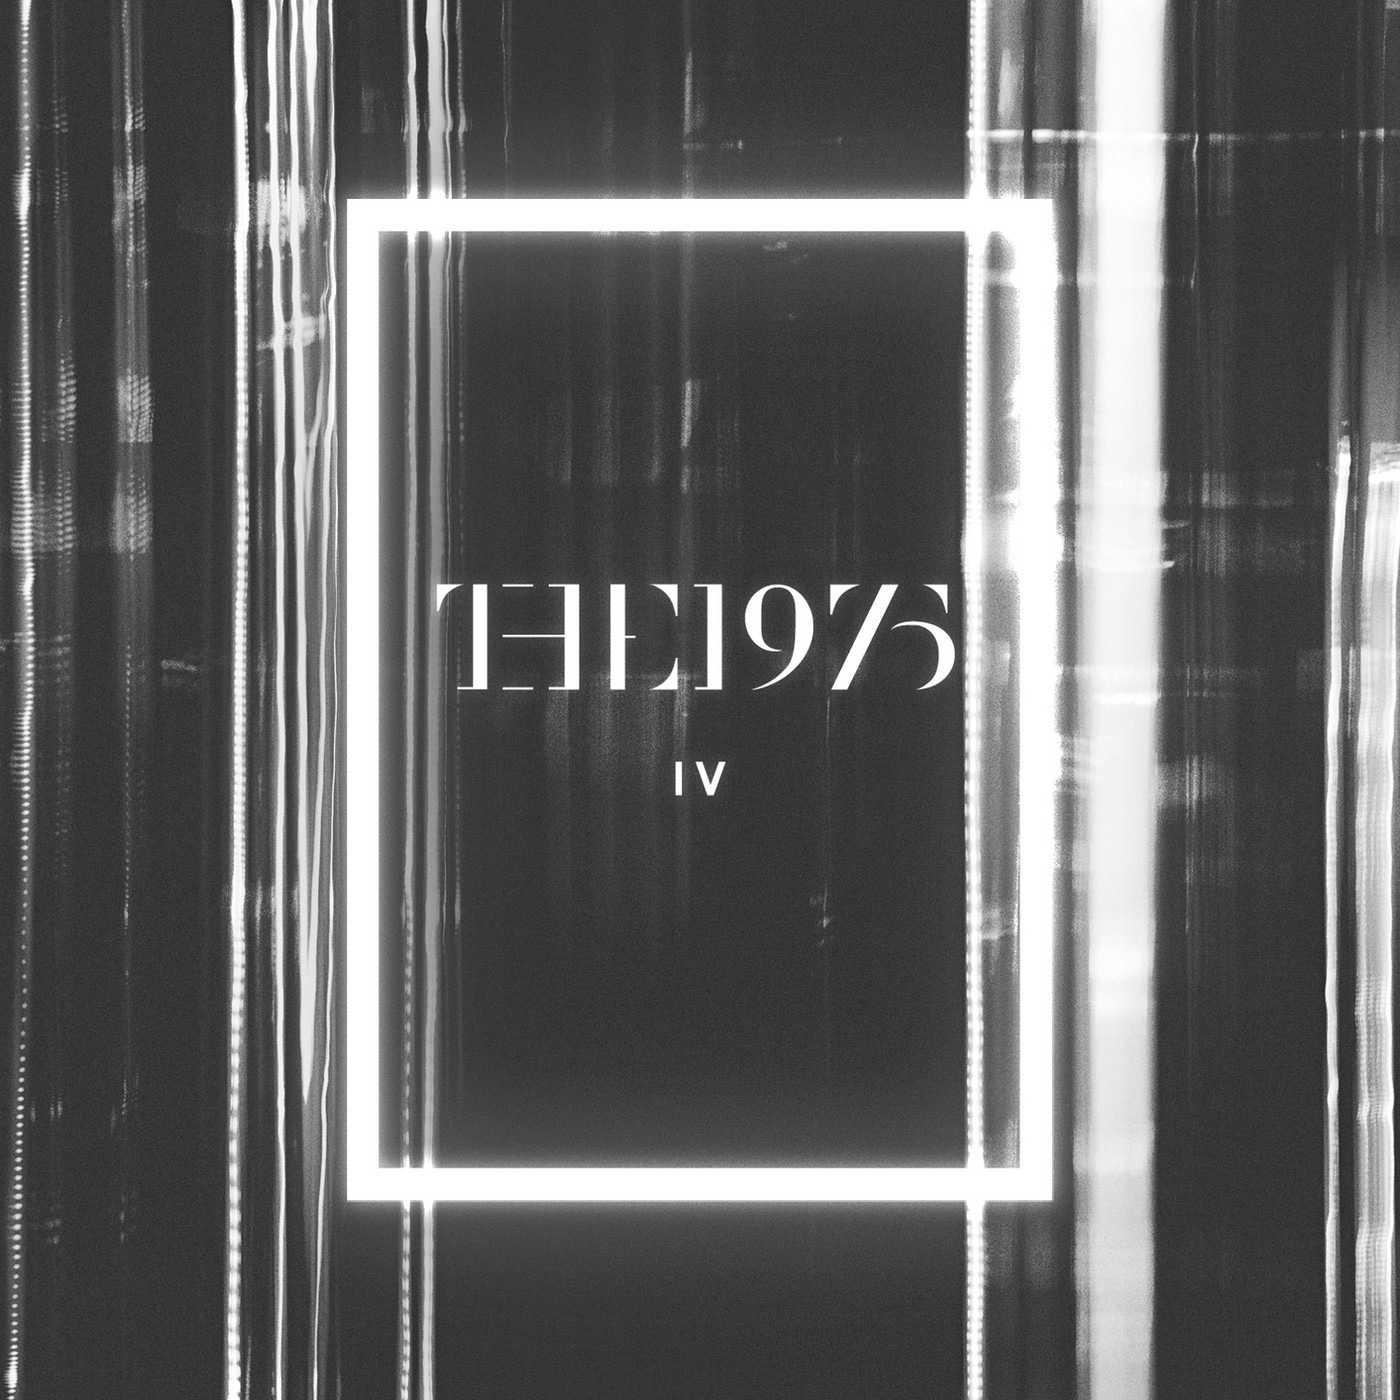 I'm in Love with You, The 1975 Wiki